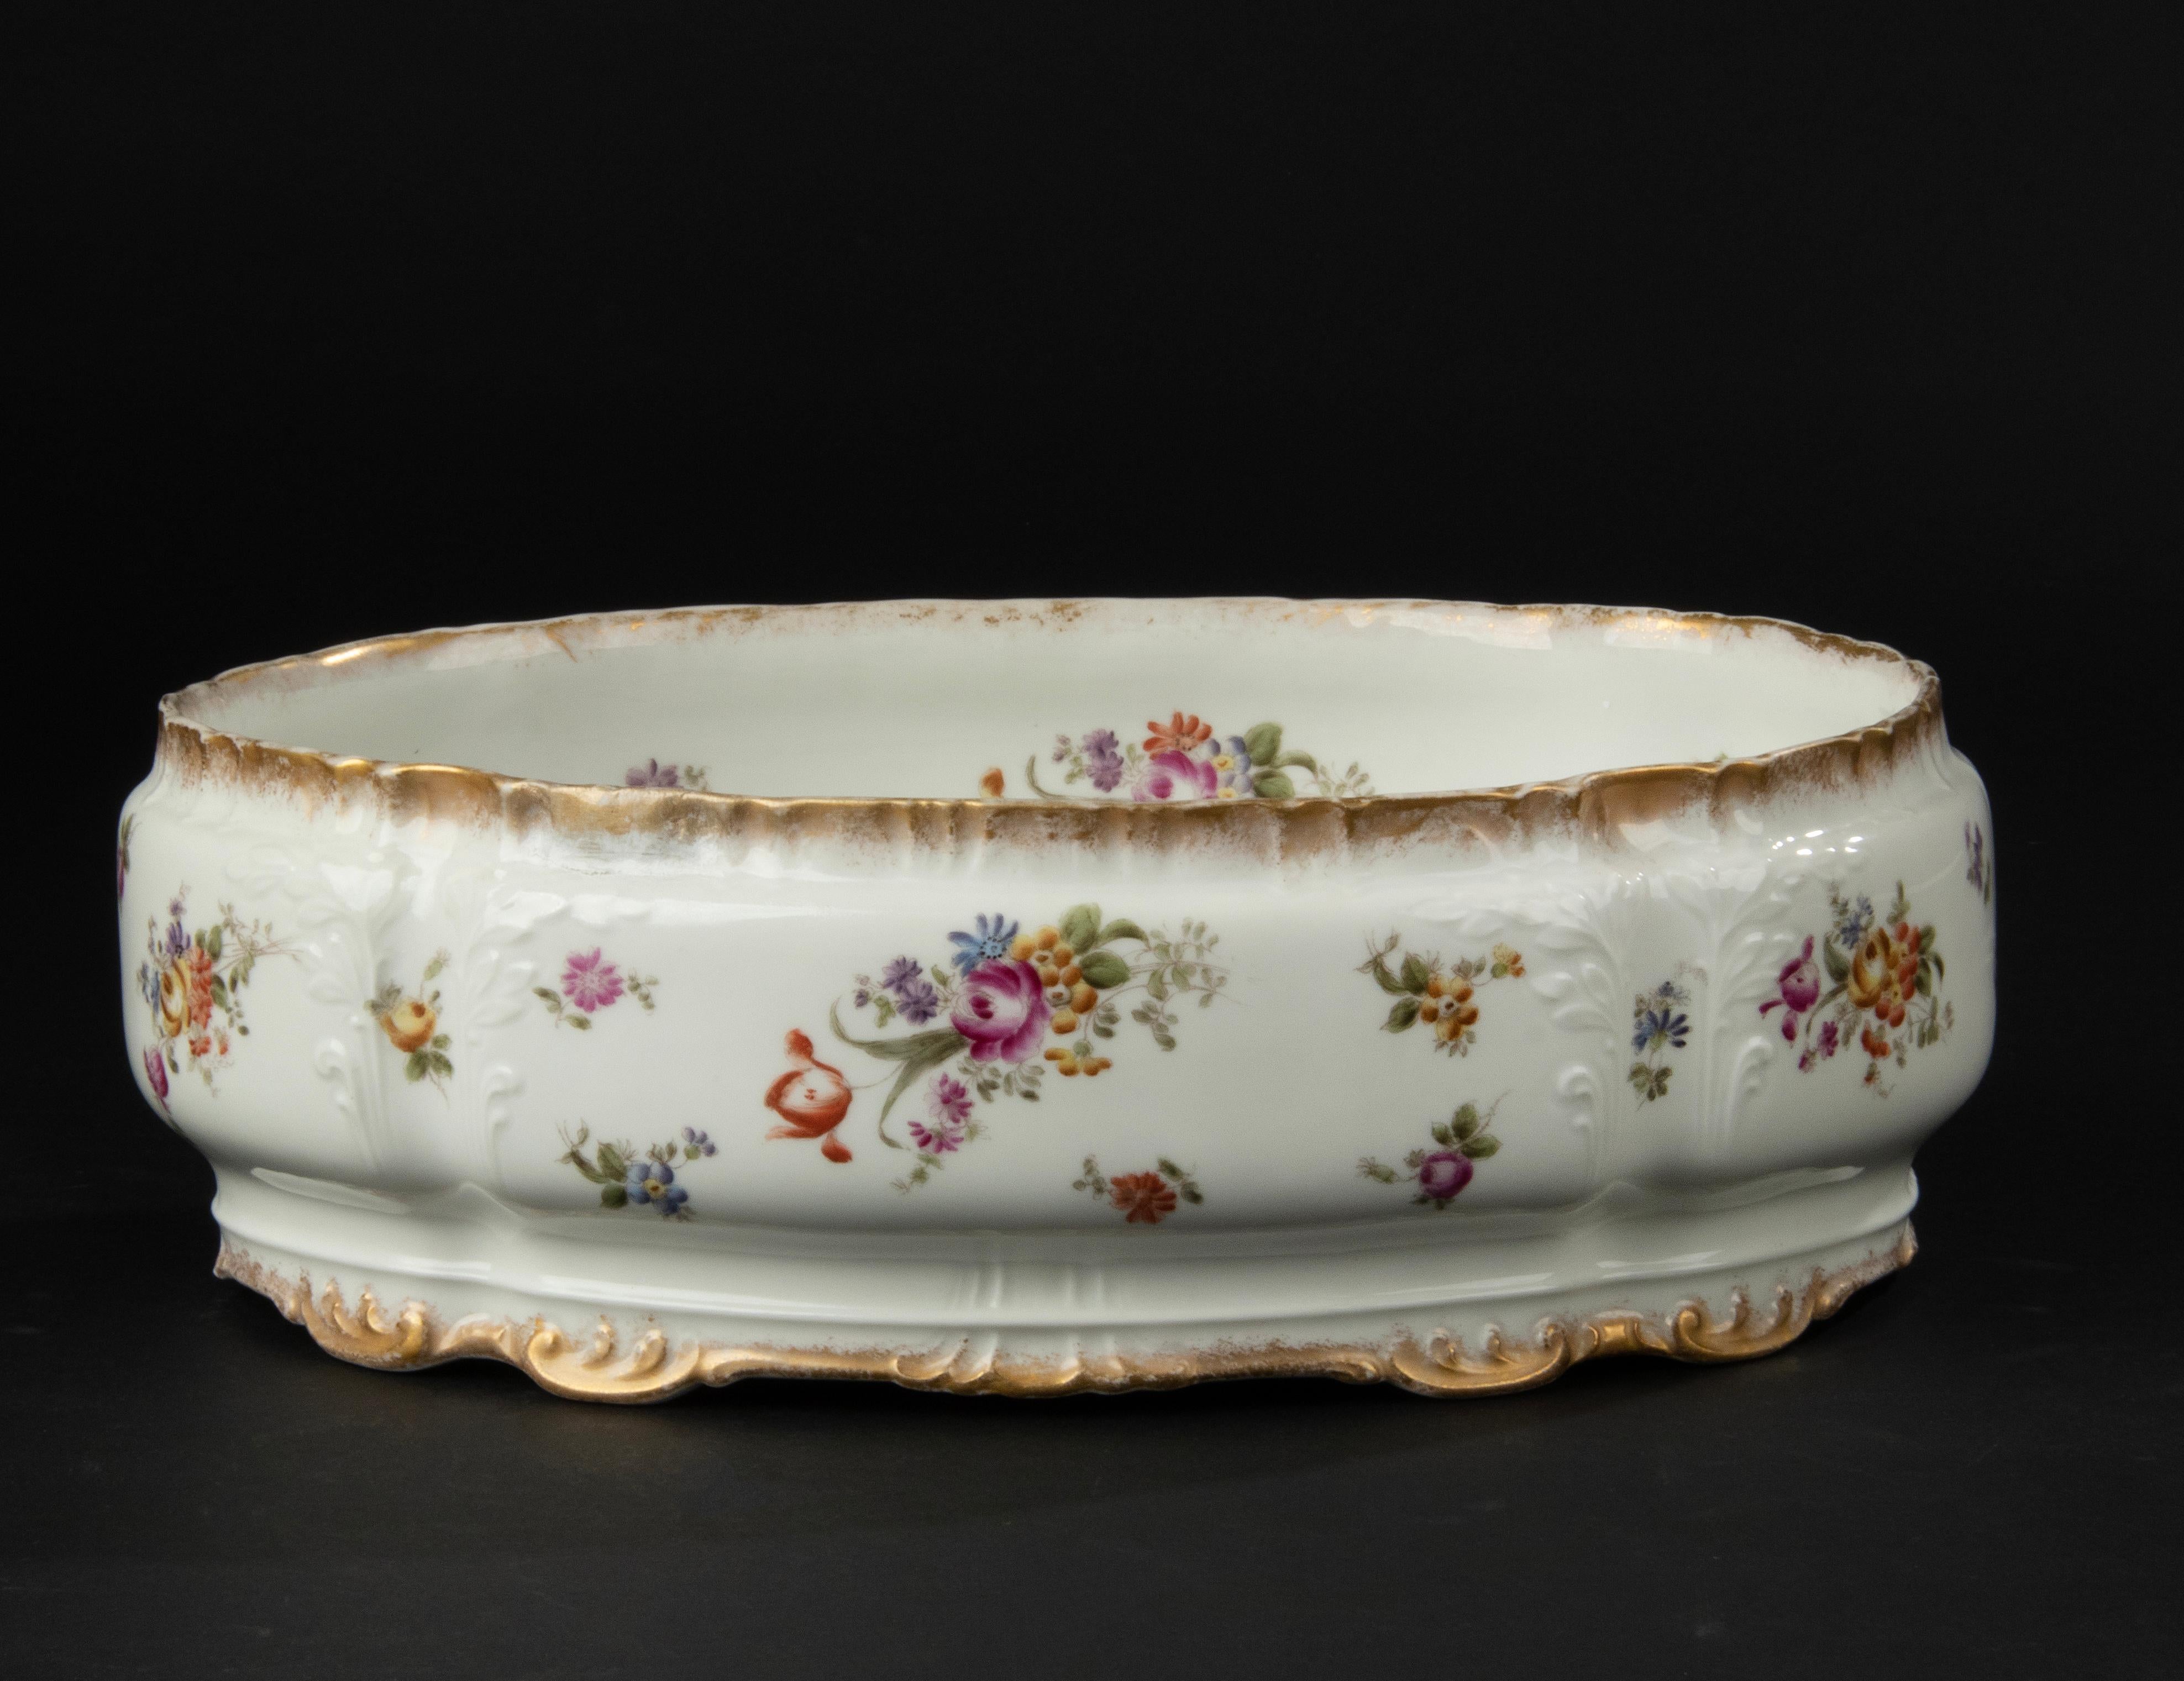 Beautiful porcelain jardieniere, made by the French brand Limoges. The jardiniere has beautiful relief decorations, gold-colored accents and a beautiful pattern of colorful flowers. This piece dates from circa 1910-1920. Marked on the bottom.
The